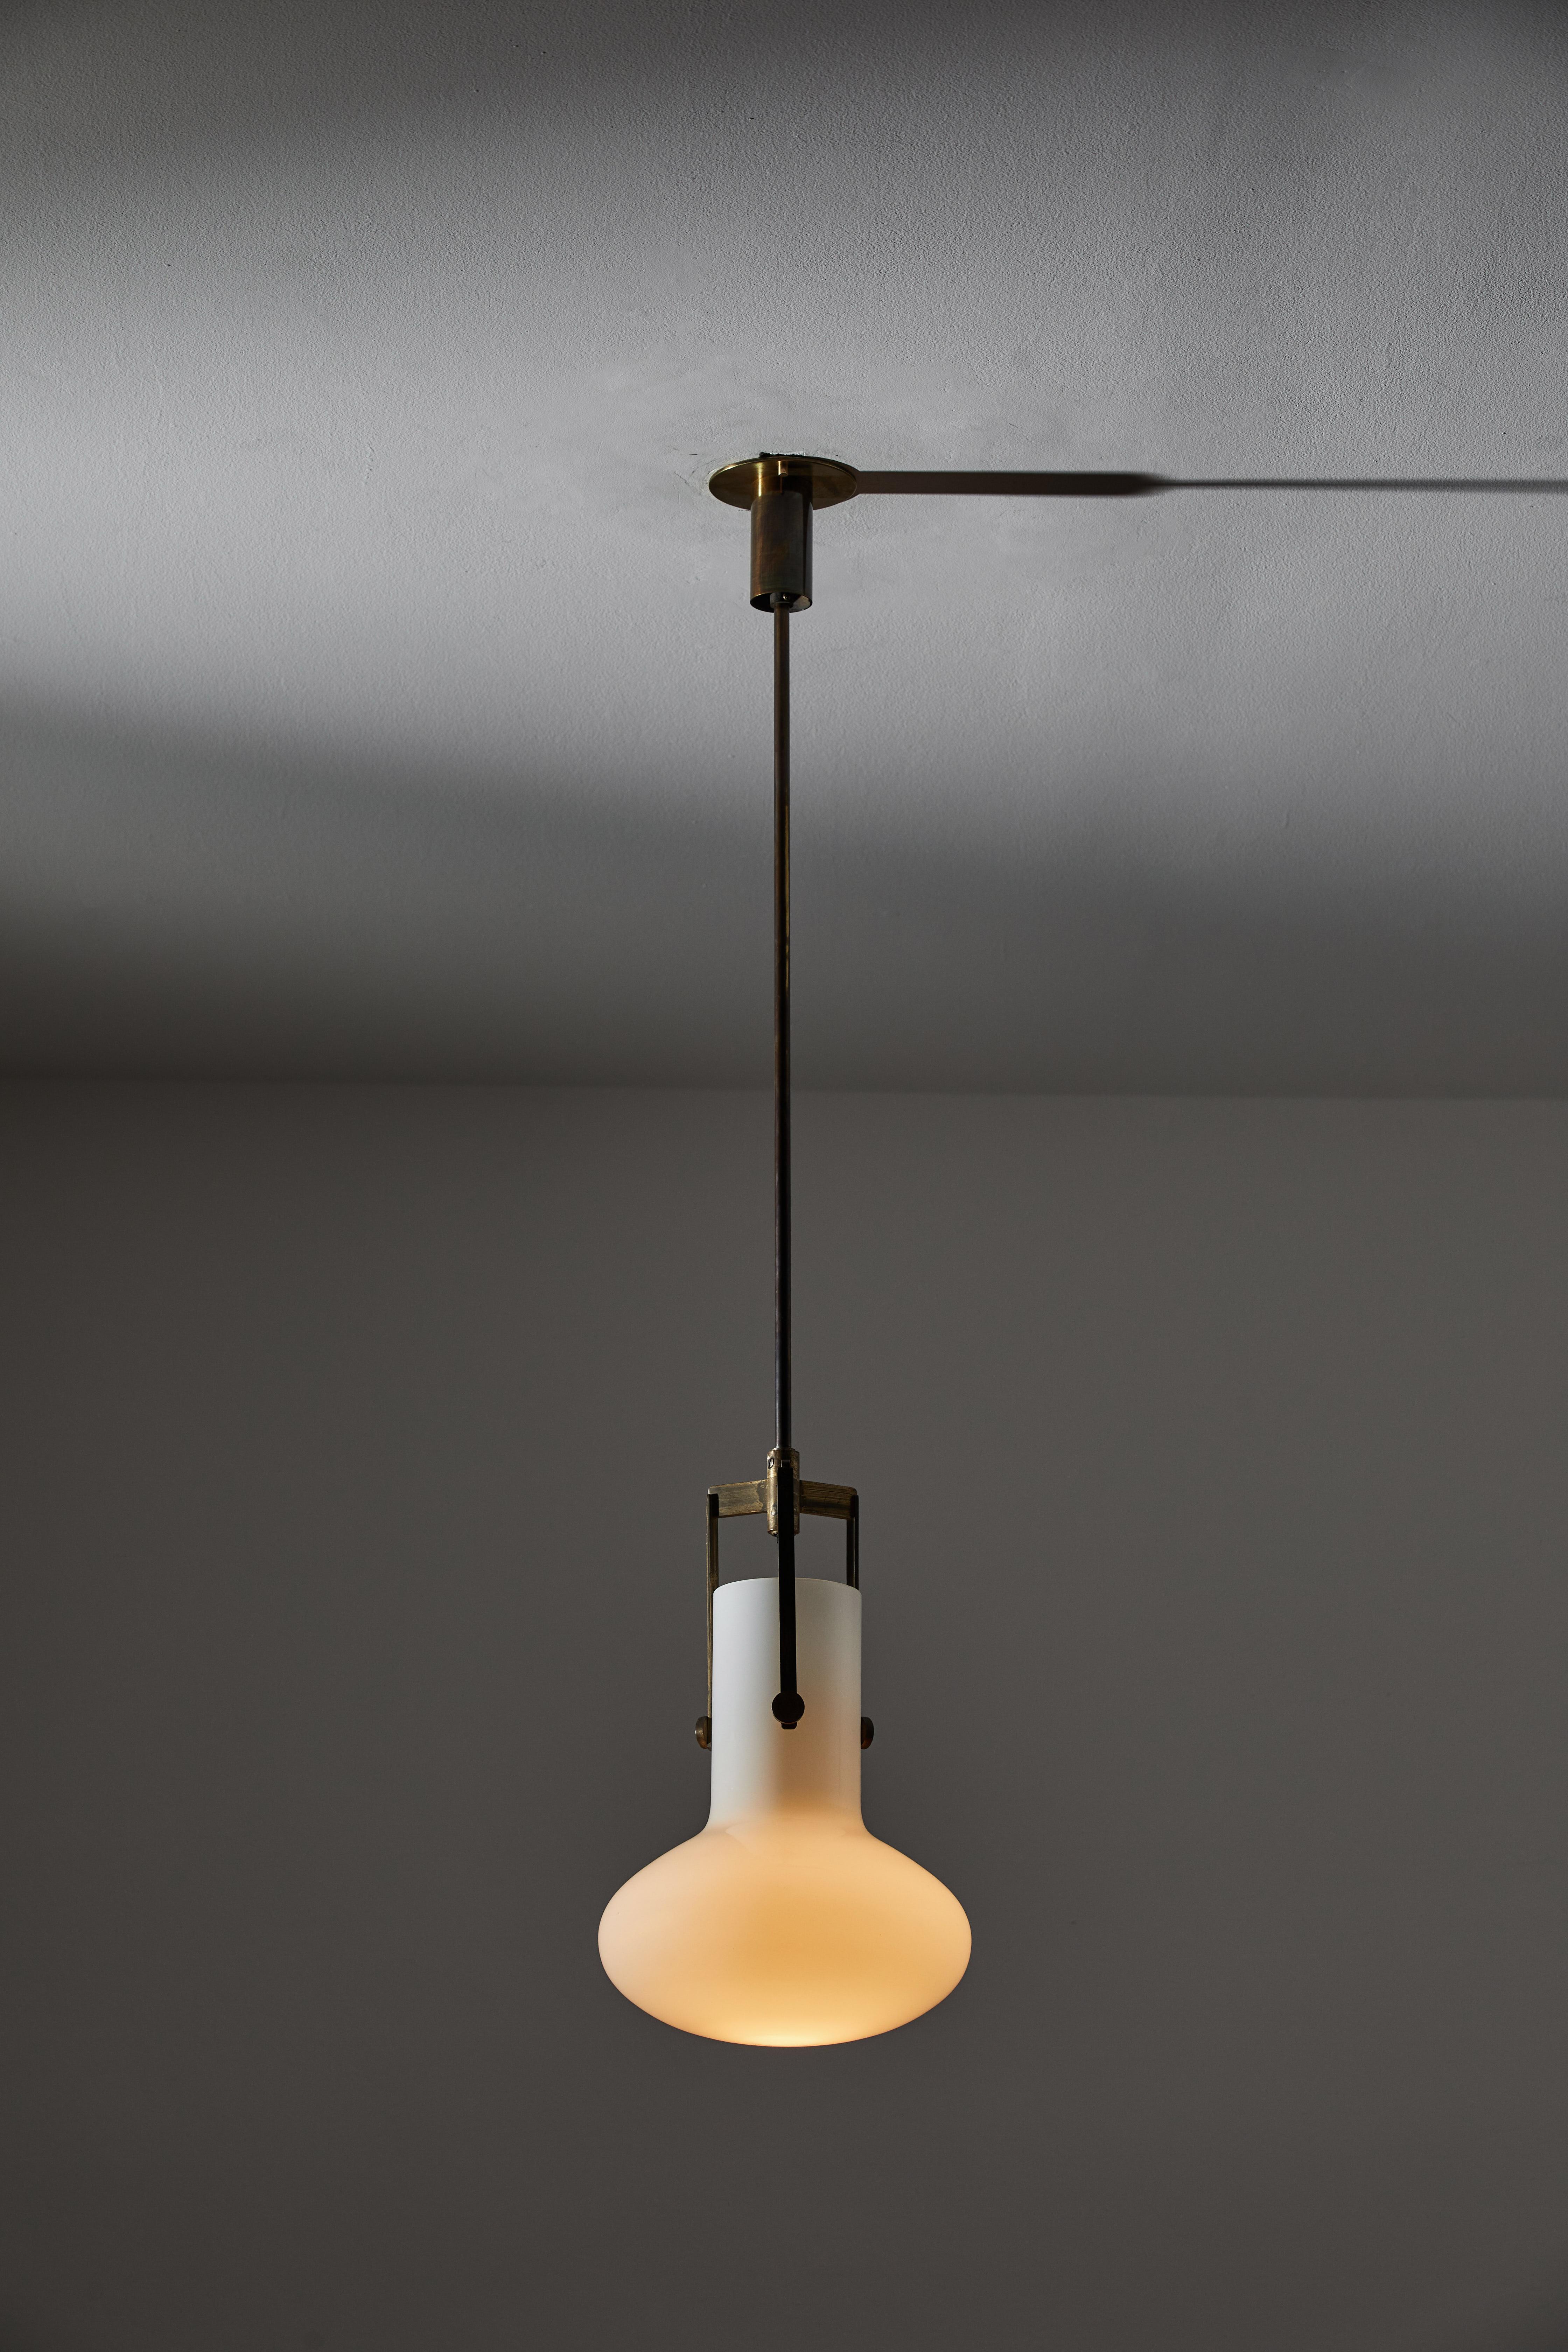 Single Pendant by Venini. Designed and manufactured in Italy, circa 1960's. Opaline glass, brass. Wired for U.S. standards. Custom brass ceiling plate. We recommend one E26 75w maximum bulb. Bulbs provided as a one time courtesy. Overall drop can be